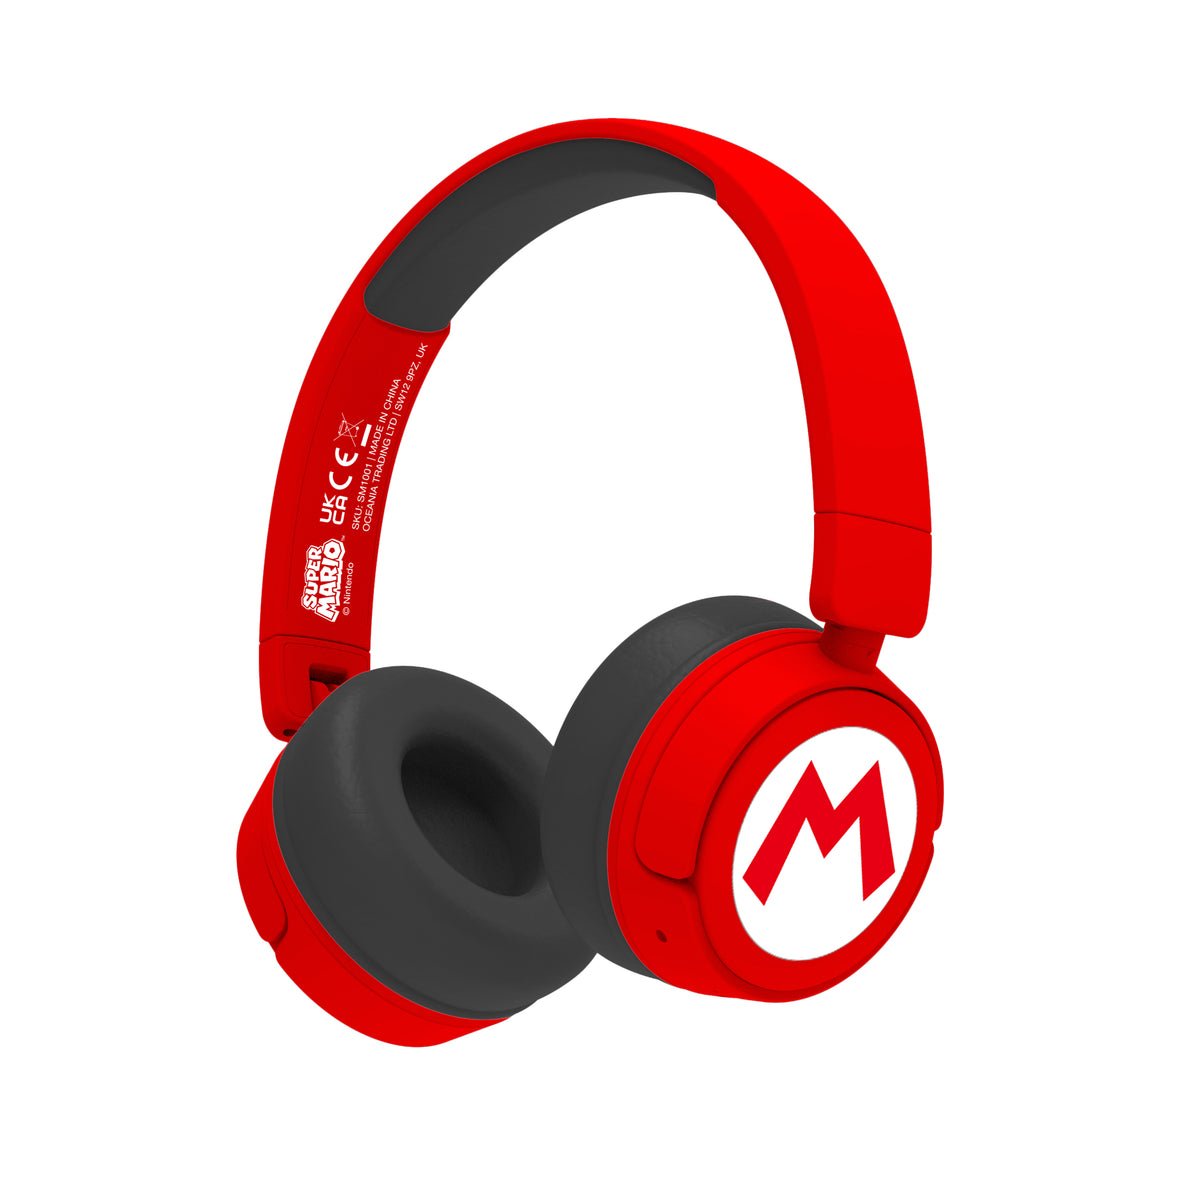 OTL Super Mario Kids Over-Ear Wireless Headphone - Red | SM1016 from OTL - DID Electrical